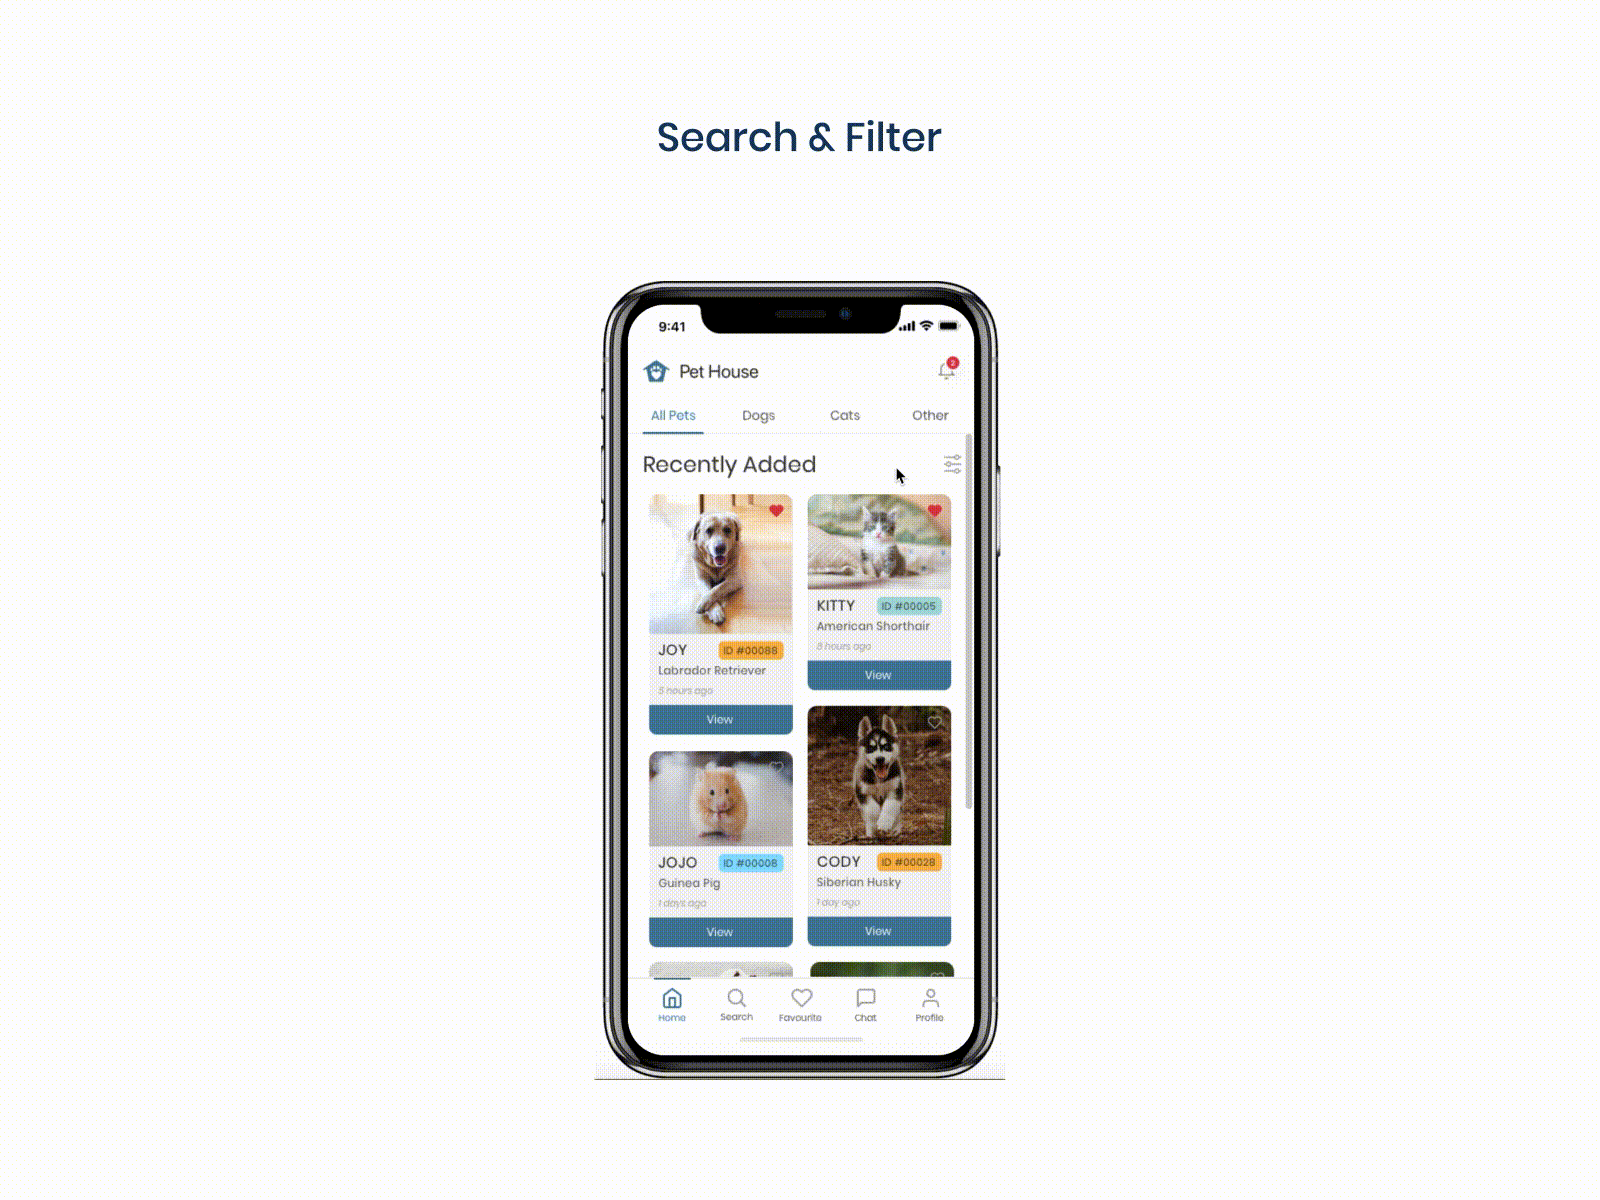 Search & Filter - Pet House - Mobile App UI 2019 design filters inspiration search results ui ui ux ui design uiinspirations uikit user experience user interface user interface design userinterface ux ui ux design uxdesign uxinspiration